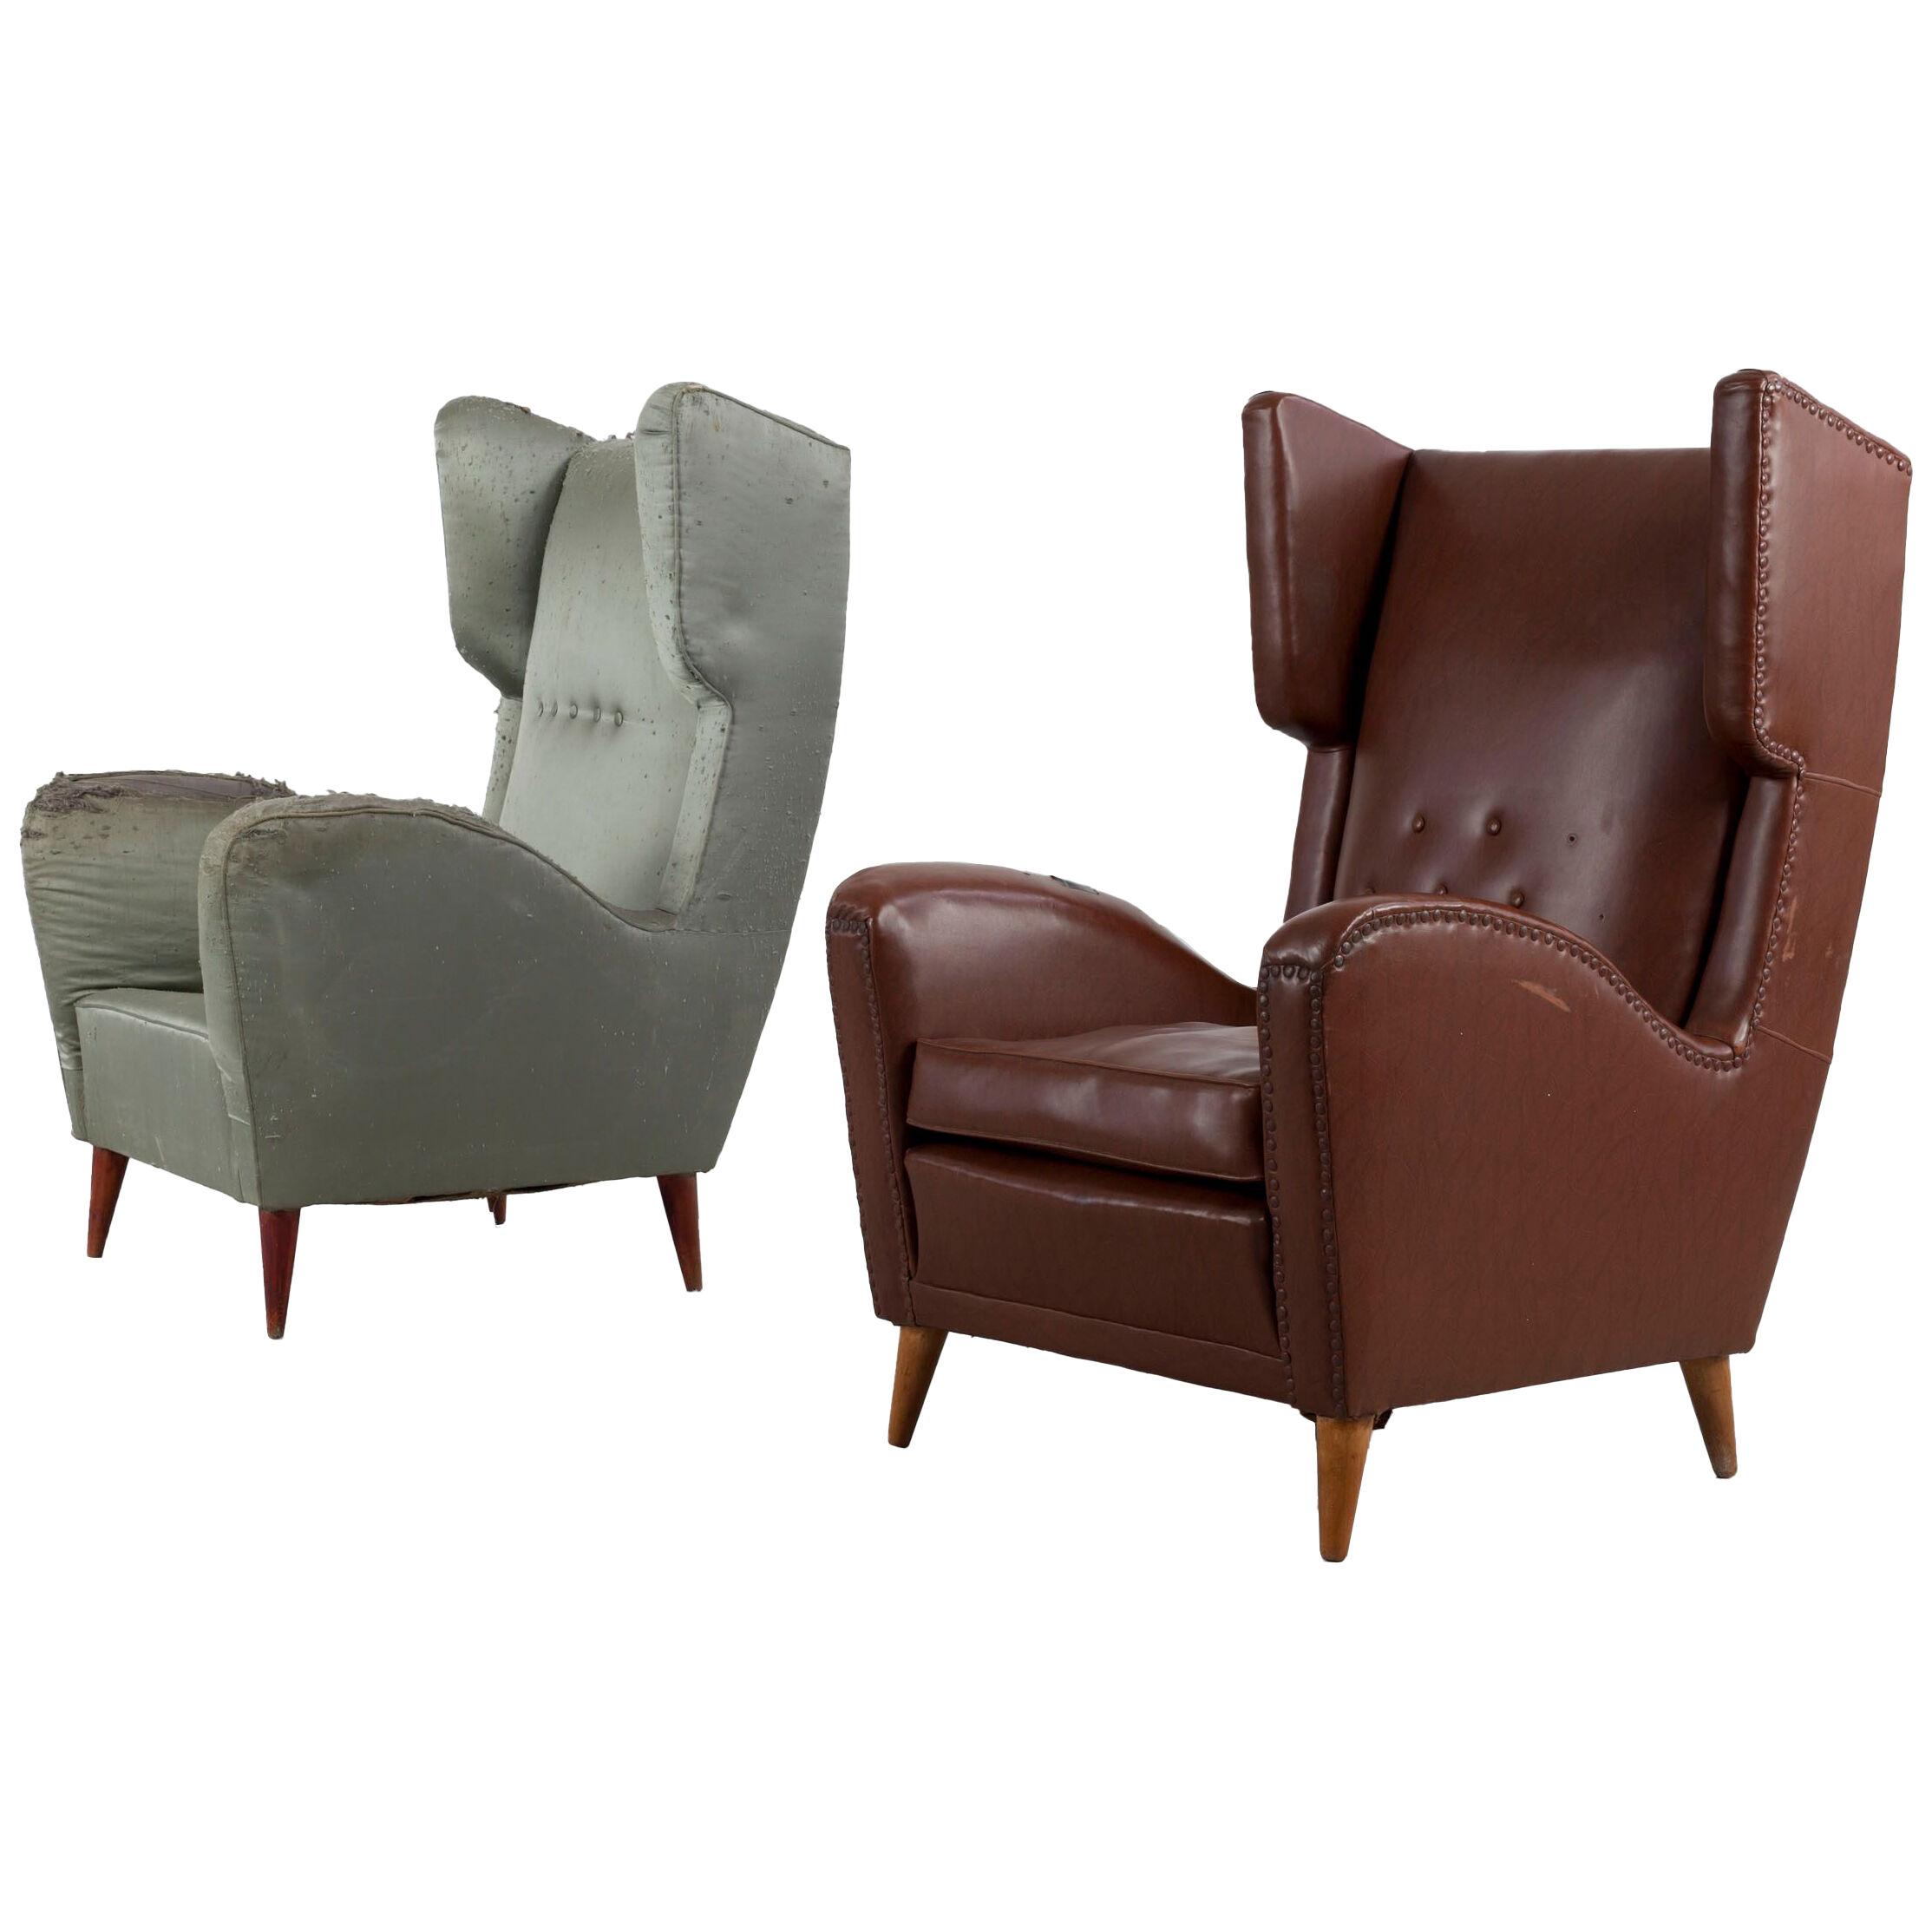 Set of Two Wingback Chairs, Design by Melchiorre Bega, Italy, 1950s